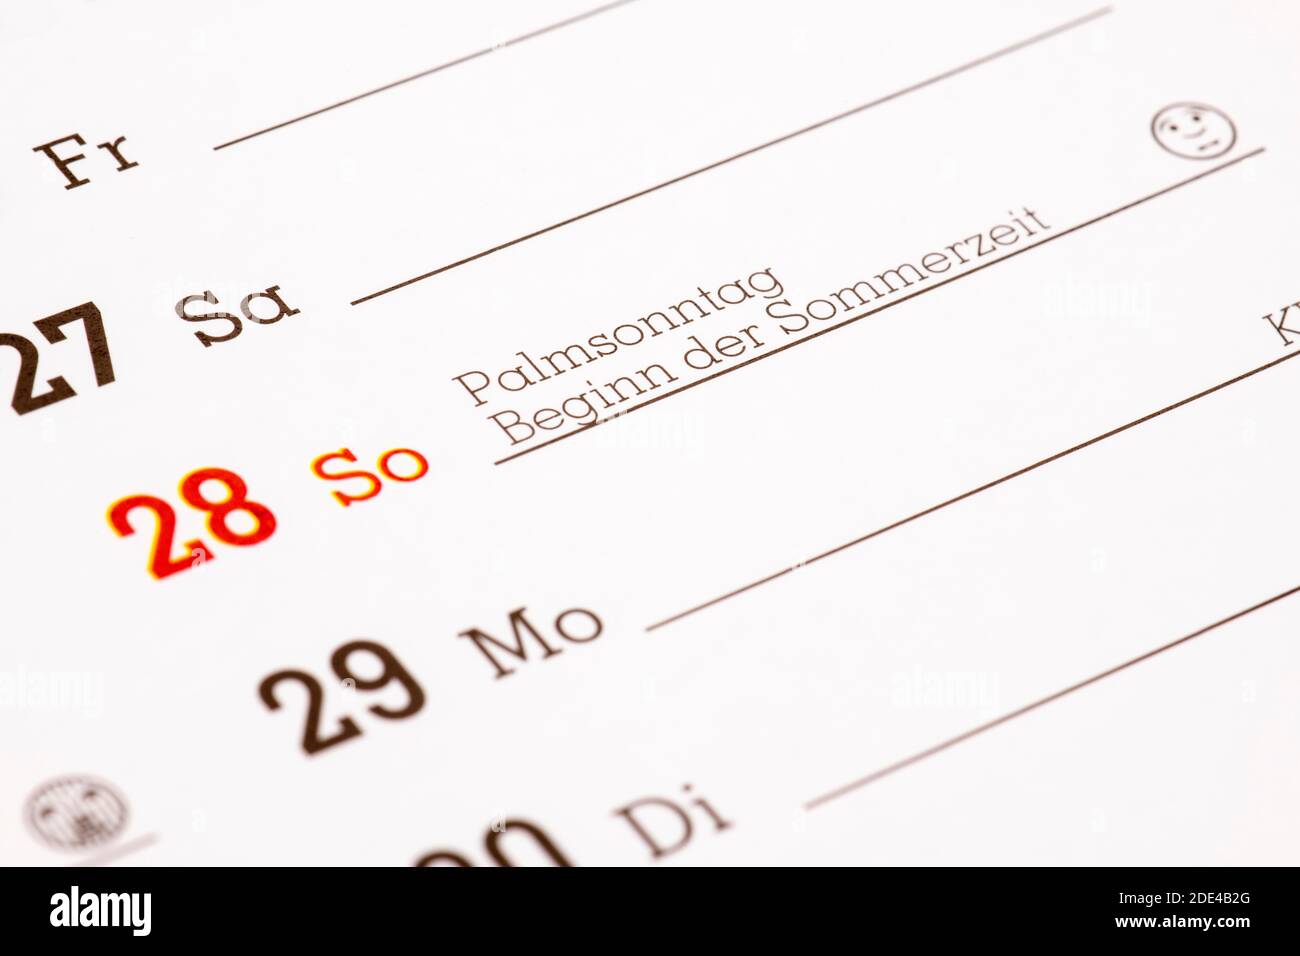 Appointment calendar, start of summer time, Palm Sunday, Germany Stock Photo